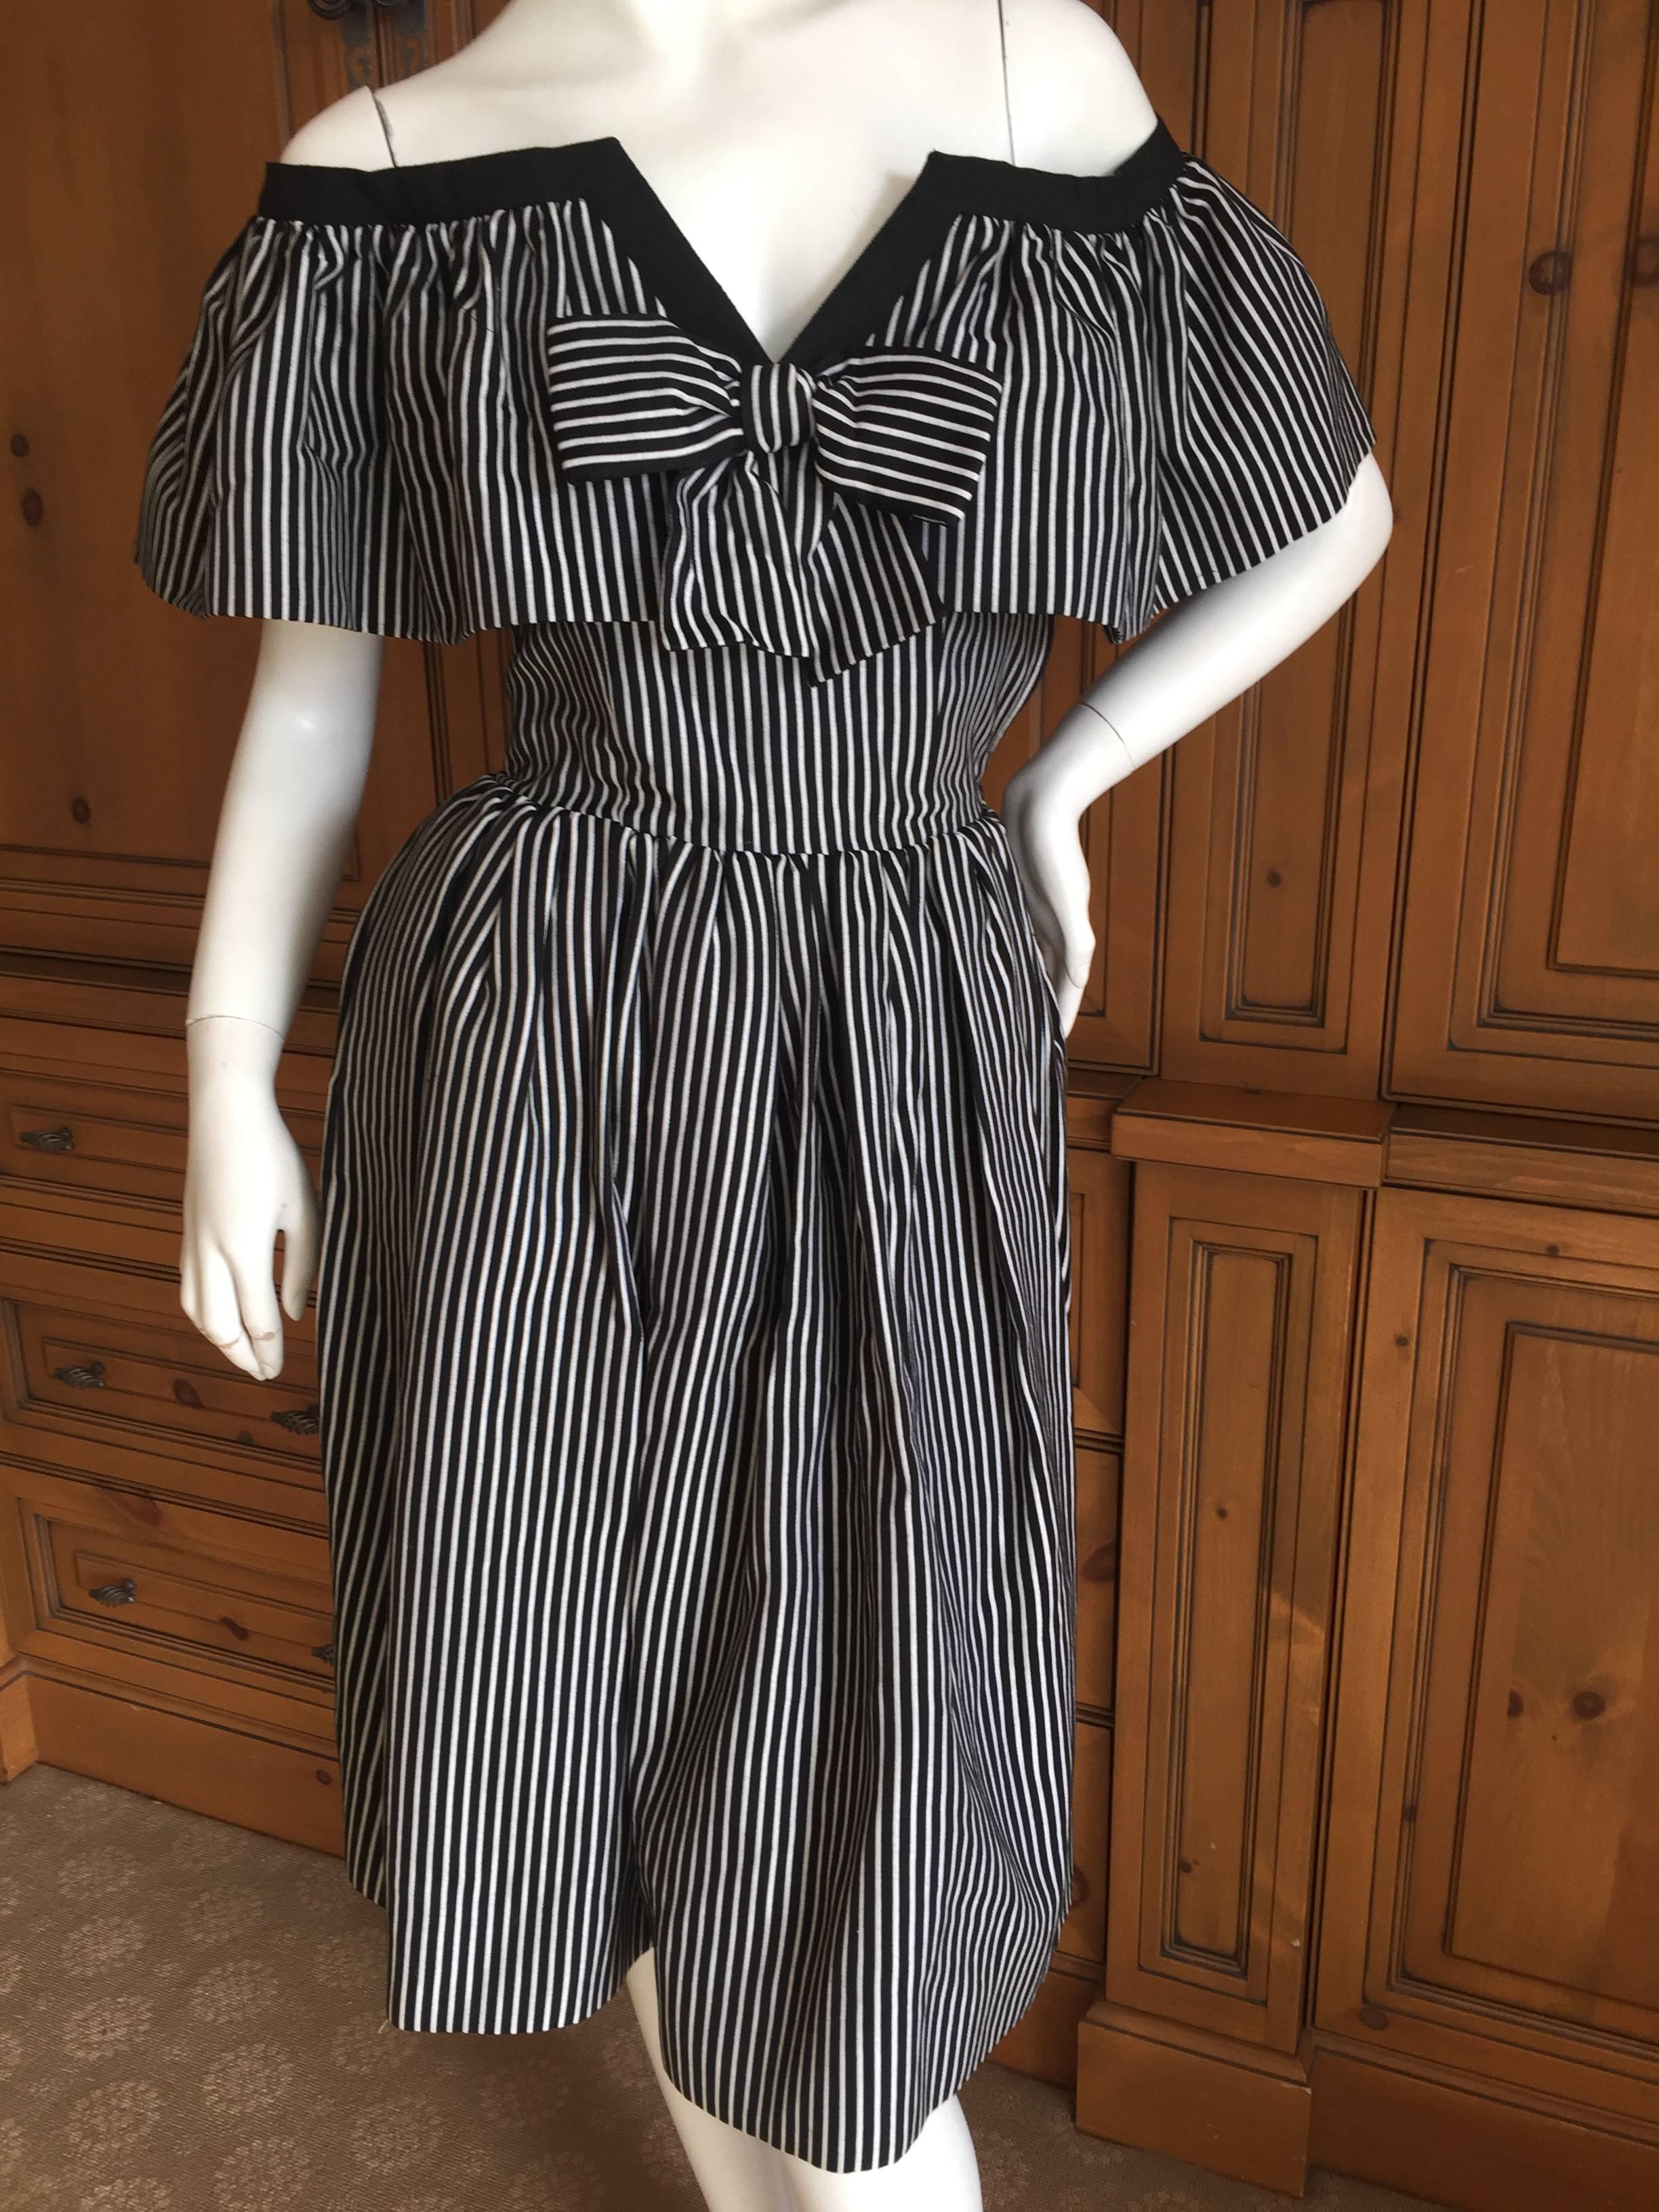 Wonderful black and white striped cotton day dress from Yves Saint Laurent  Rive Guache circa 1979.
Off the shoulder with black trim and an attached bow, this is such a sweet dress.
Size 36